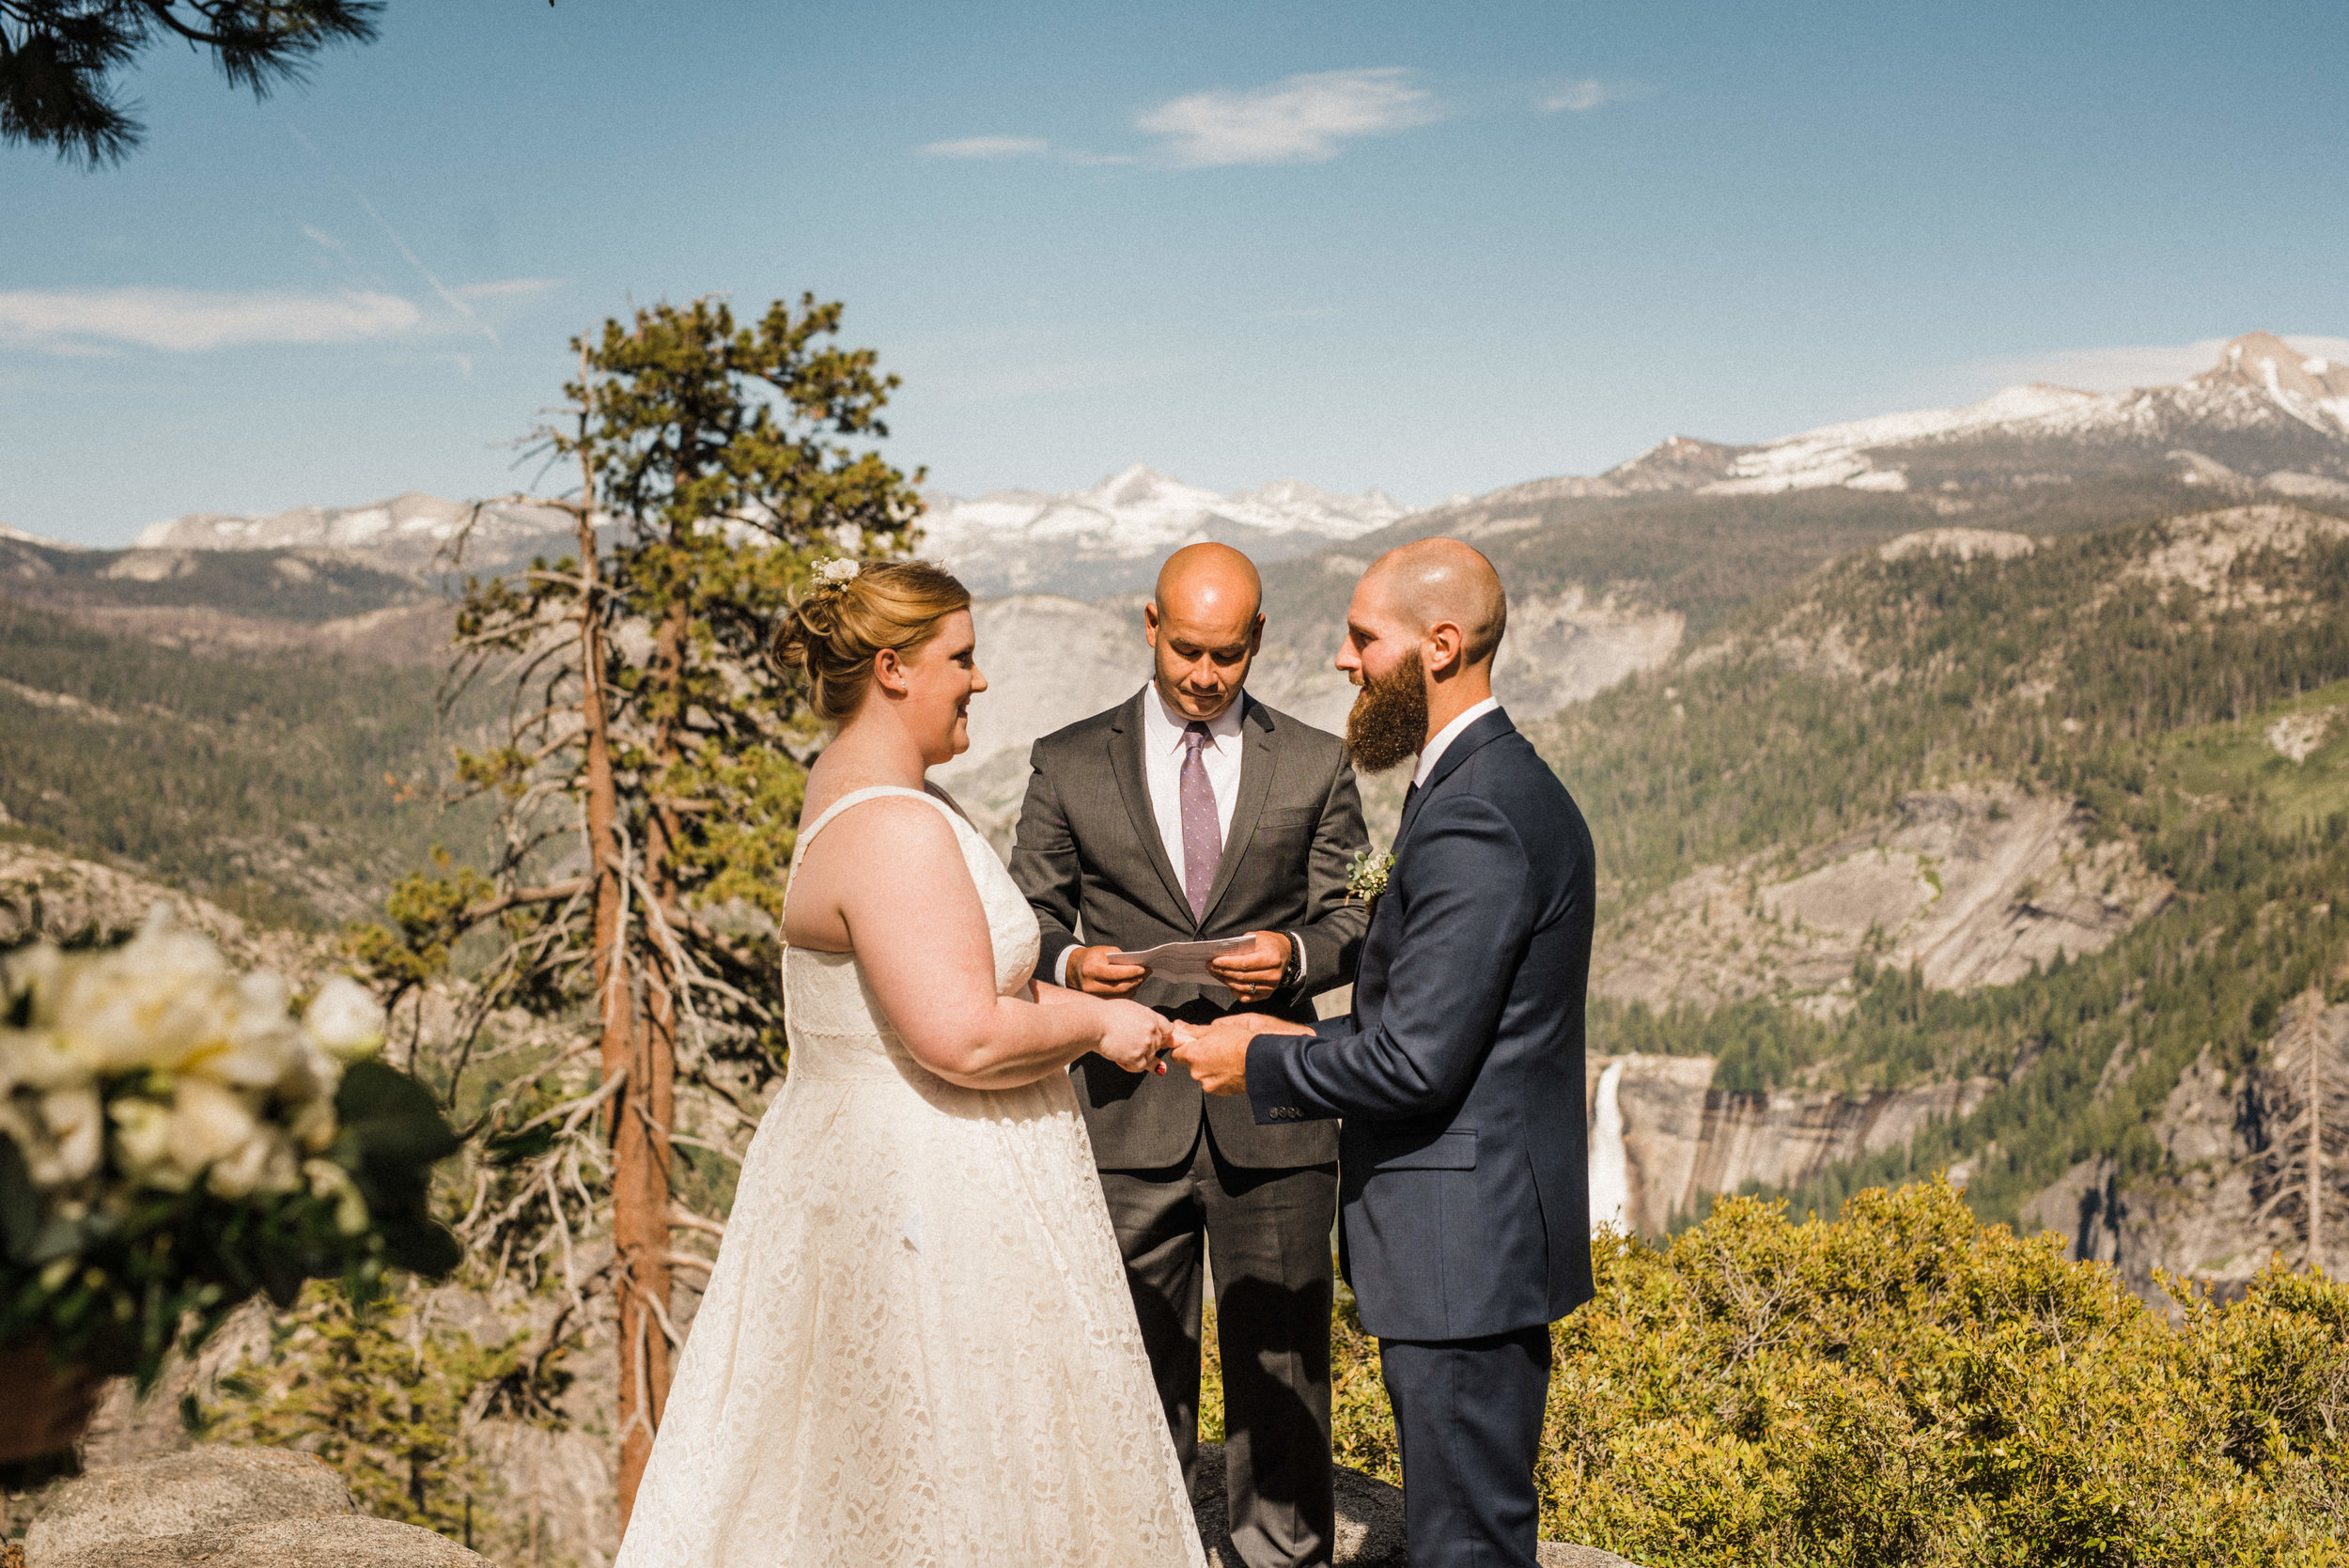 Elopement Ceremony at Glacier Point in Yosemite